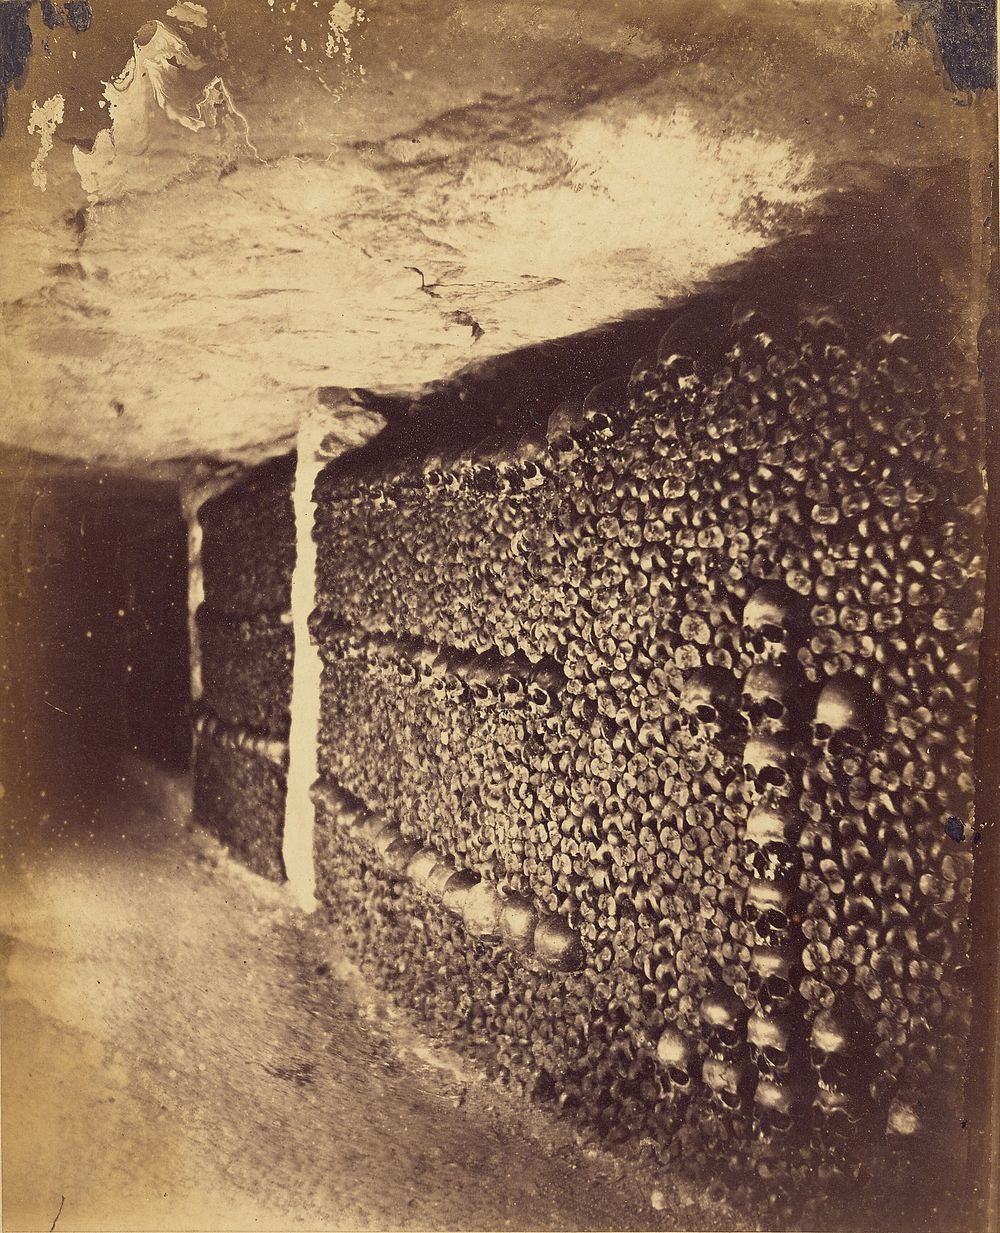 The Catacombs of Paris. The Final Gallery. by Nadar Gaspard Félix Tournachon